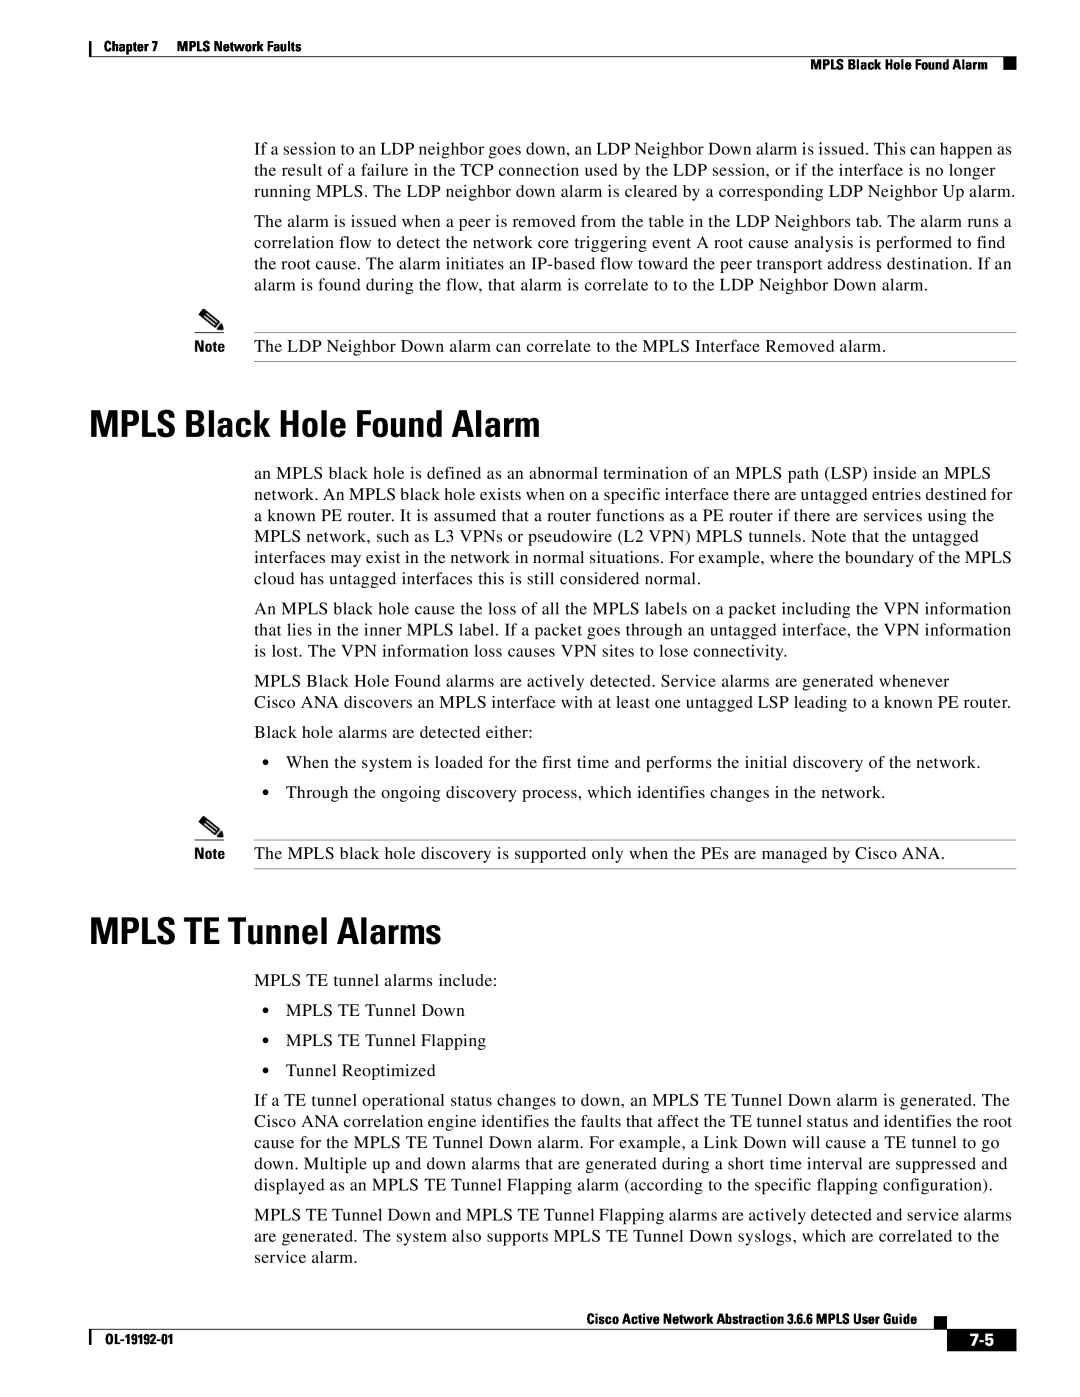 Cisco Systems 3.6.6 manual MPLS Black Hole Found Alarm, MPLS TE Tunnel Alarms 